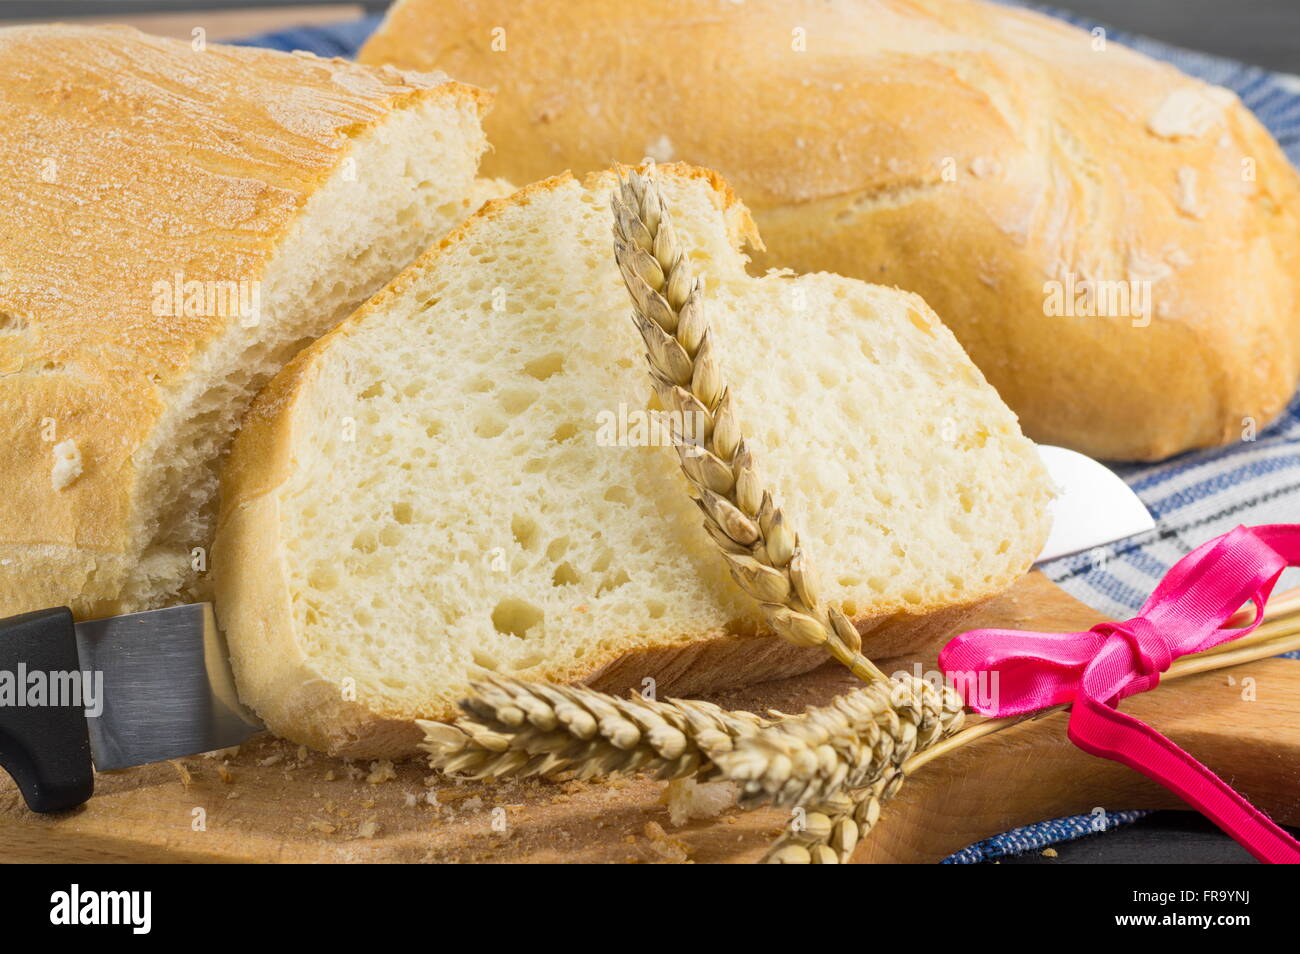 Home baked bread and a knife on the table Stock Photo